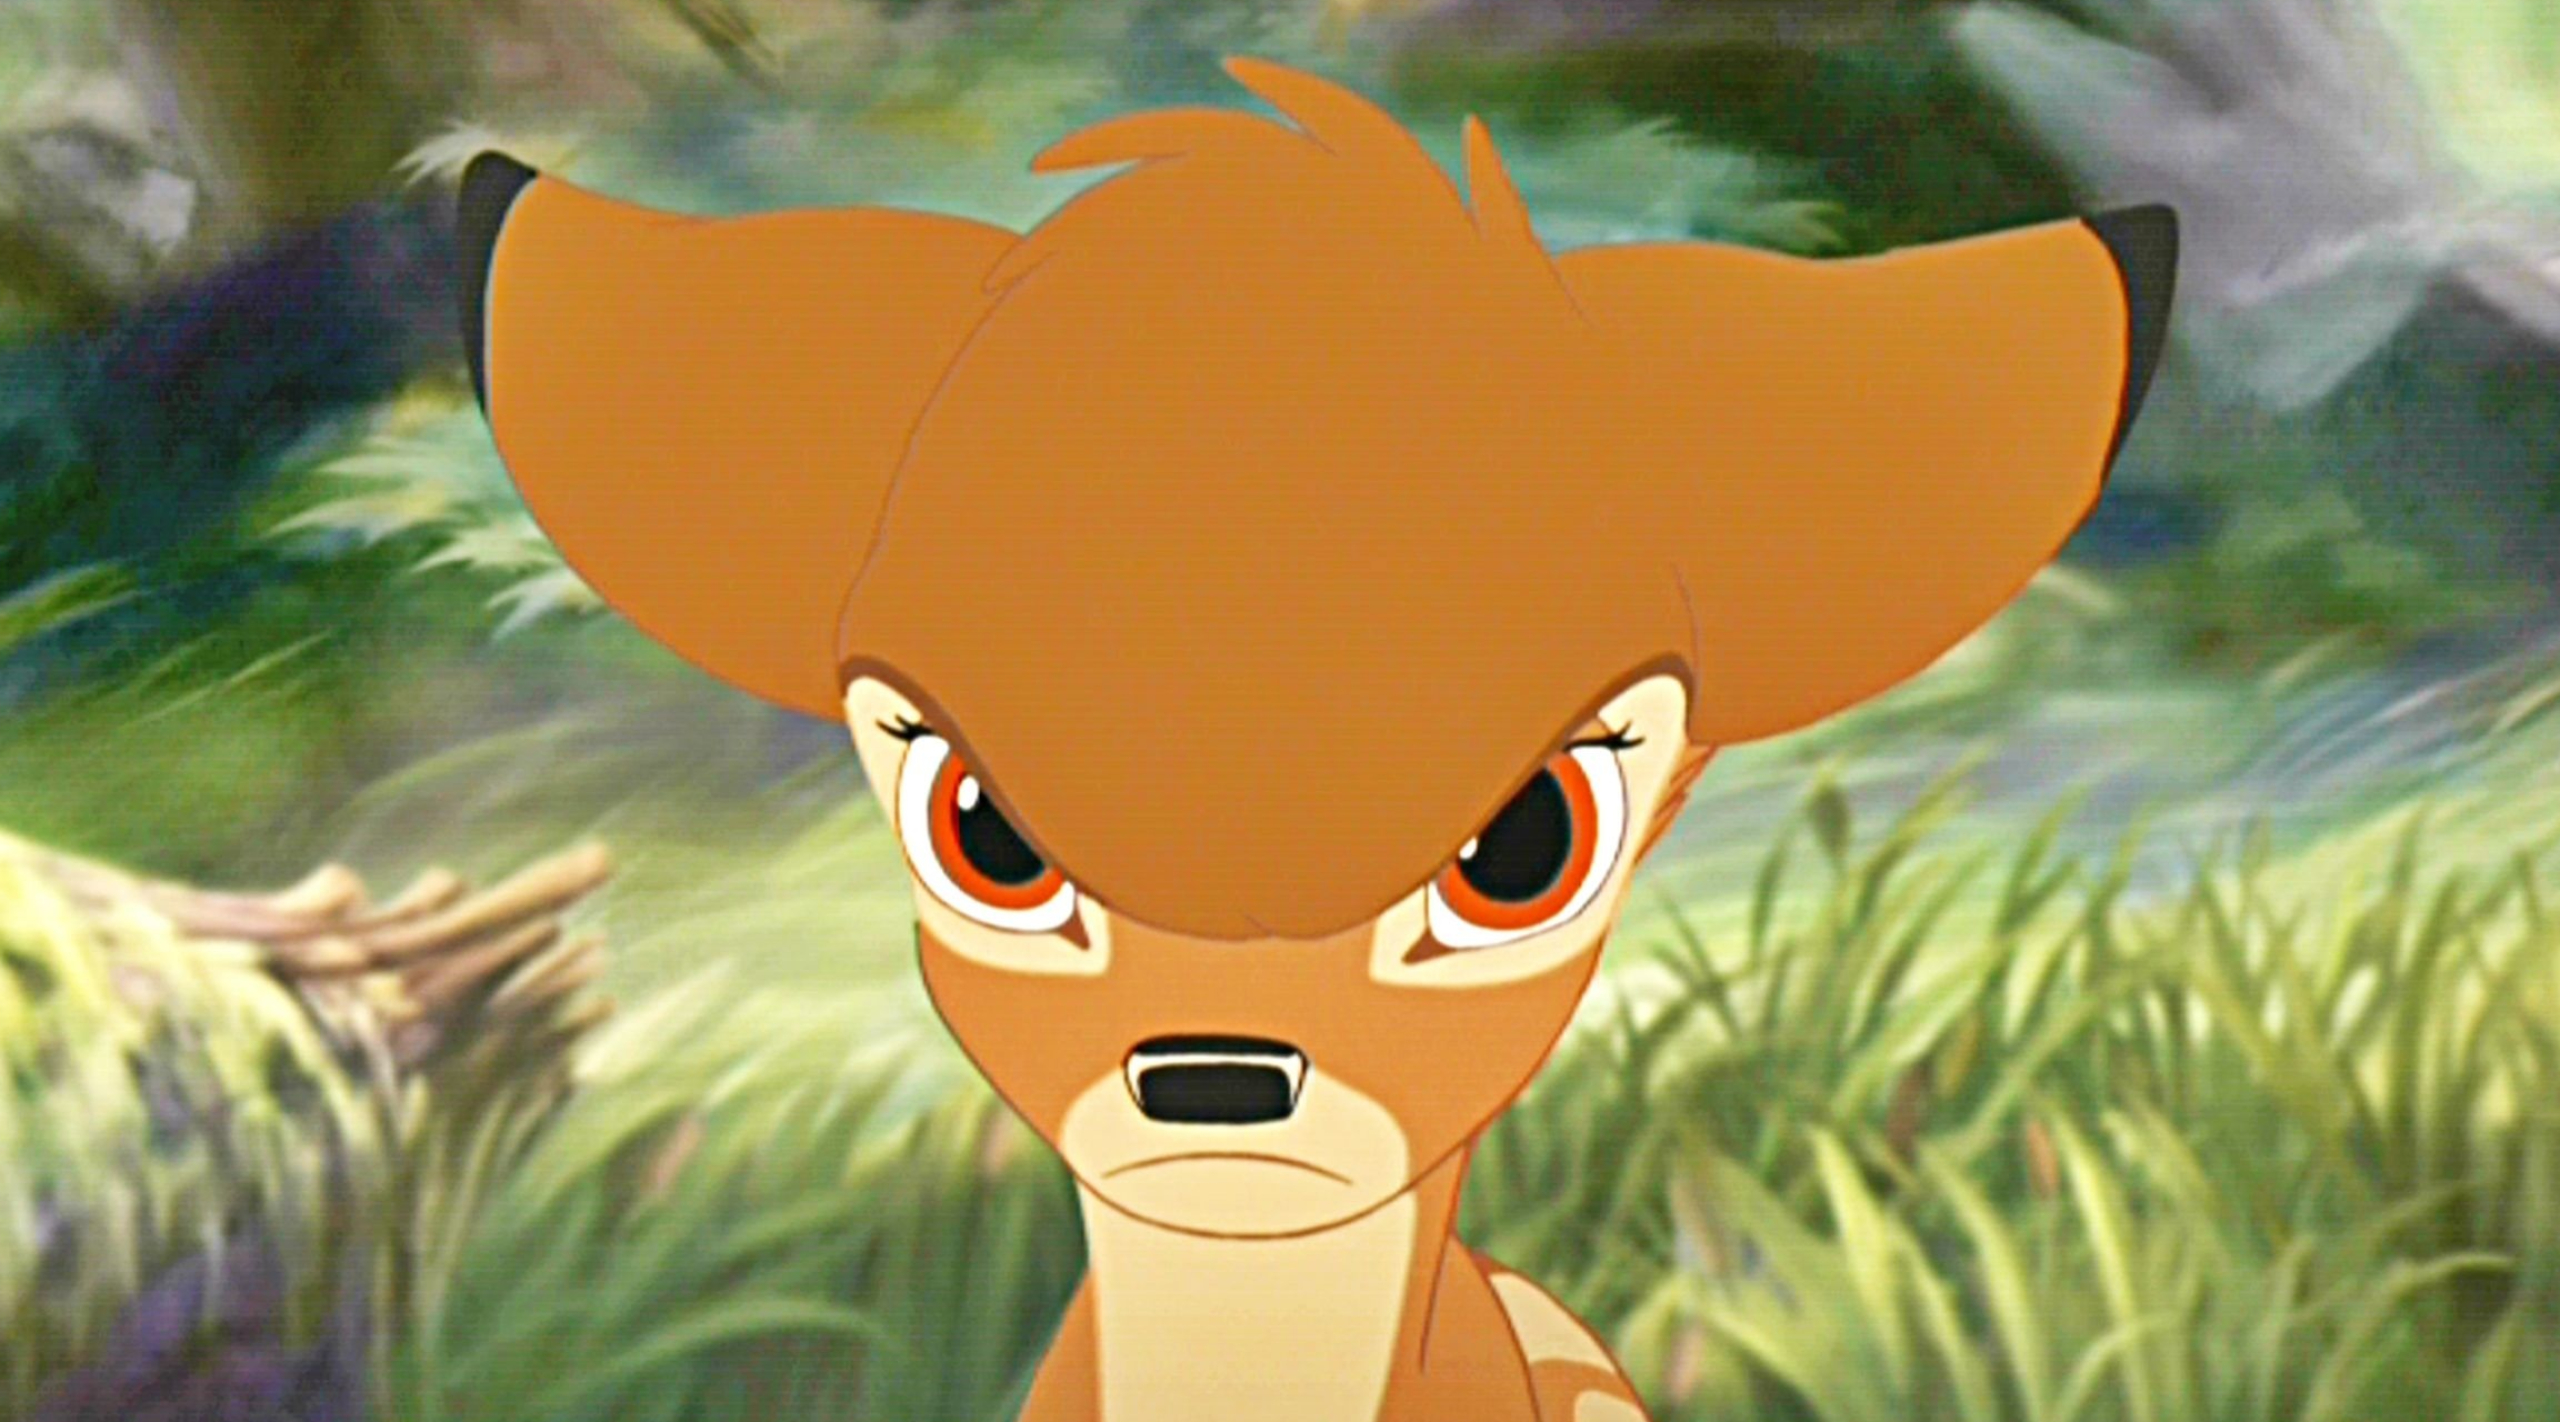 Bambi movie wallpapers, HQ images, Stunning pictures, 4K beauty, 2560x1430 HD Desktop